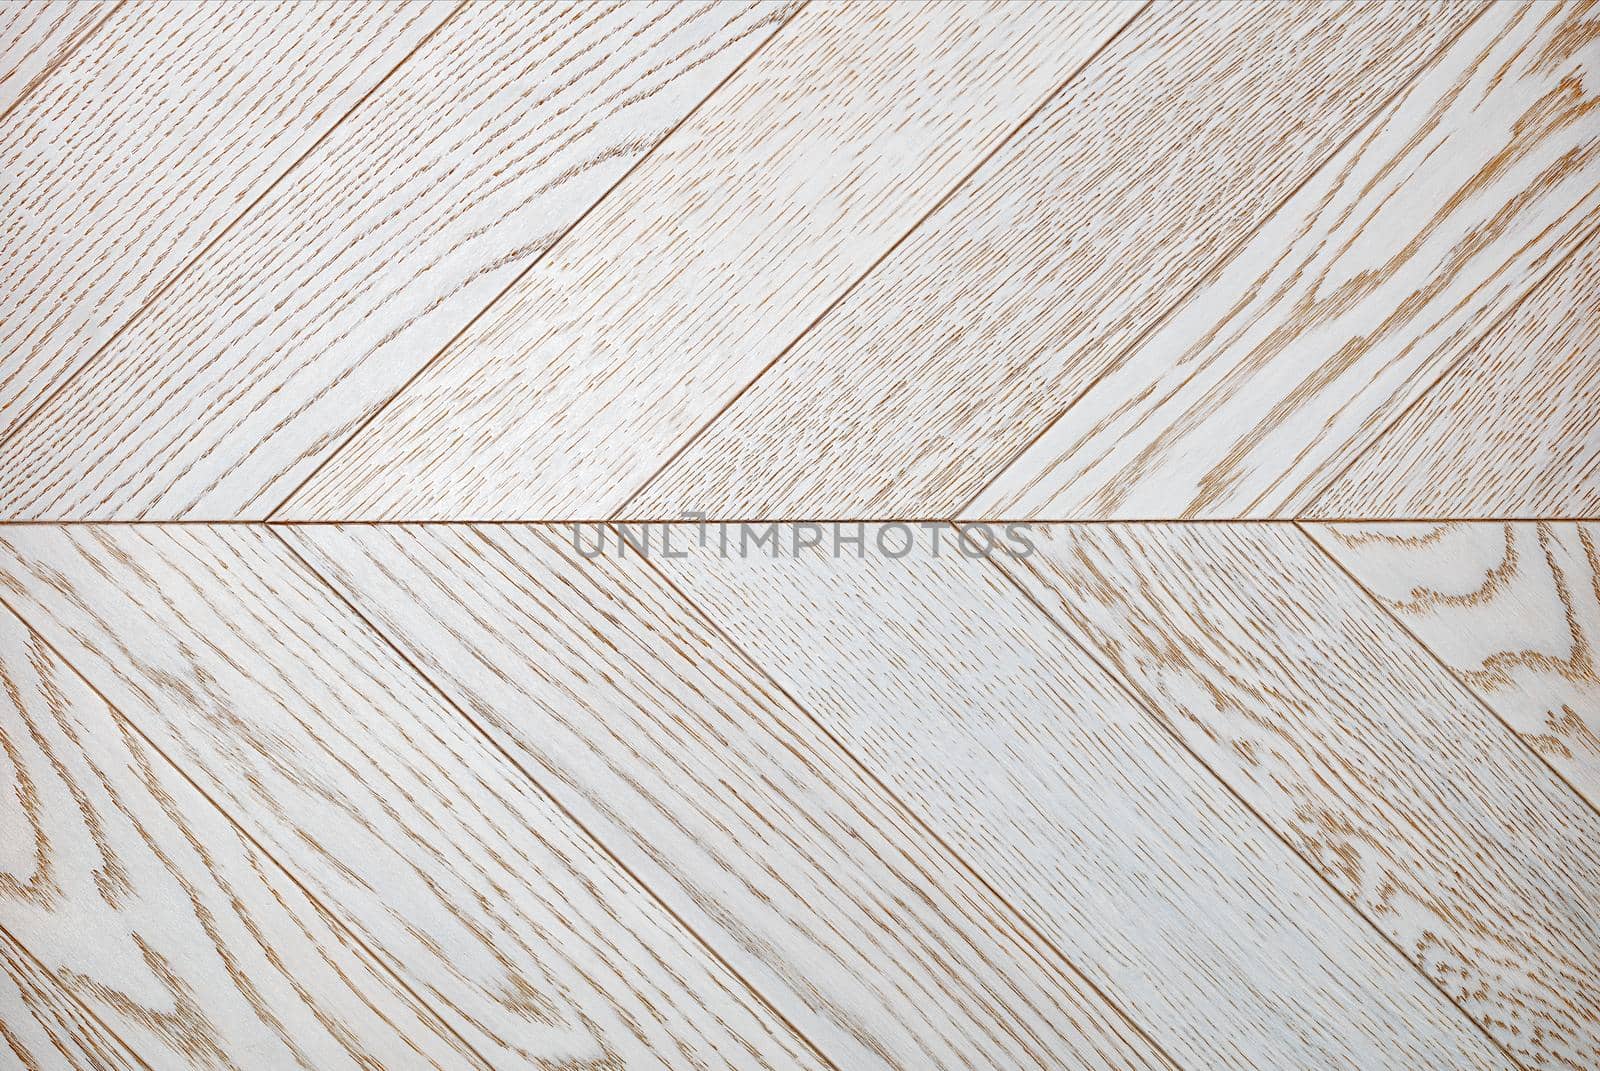 Light wood planks with a bold texture in white create a symmetrical herringbone pattern. by Sergii